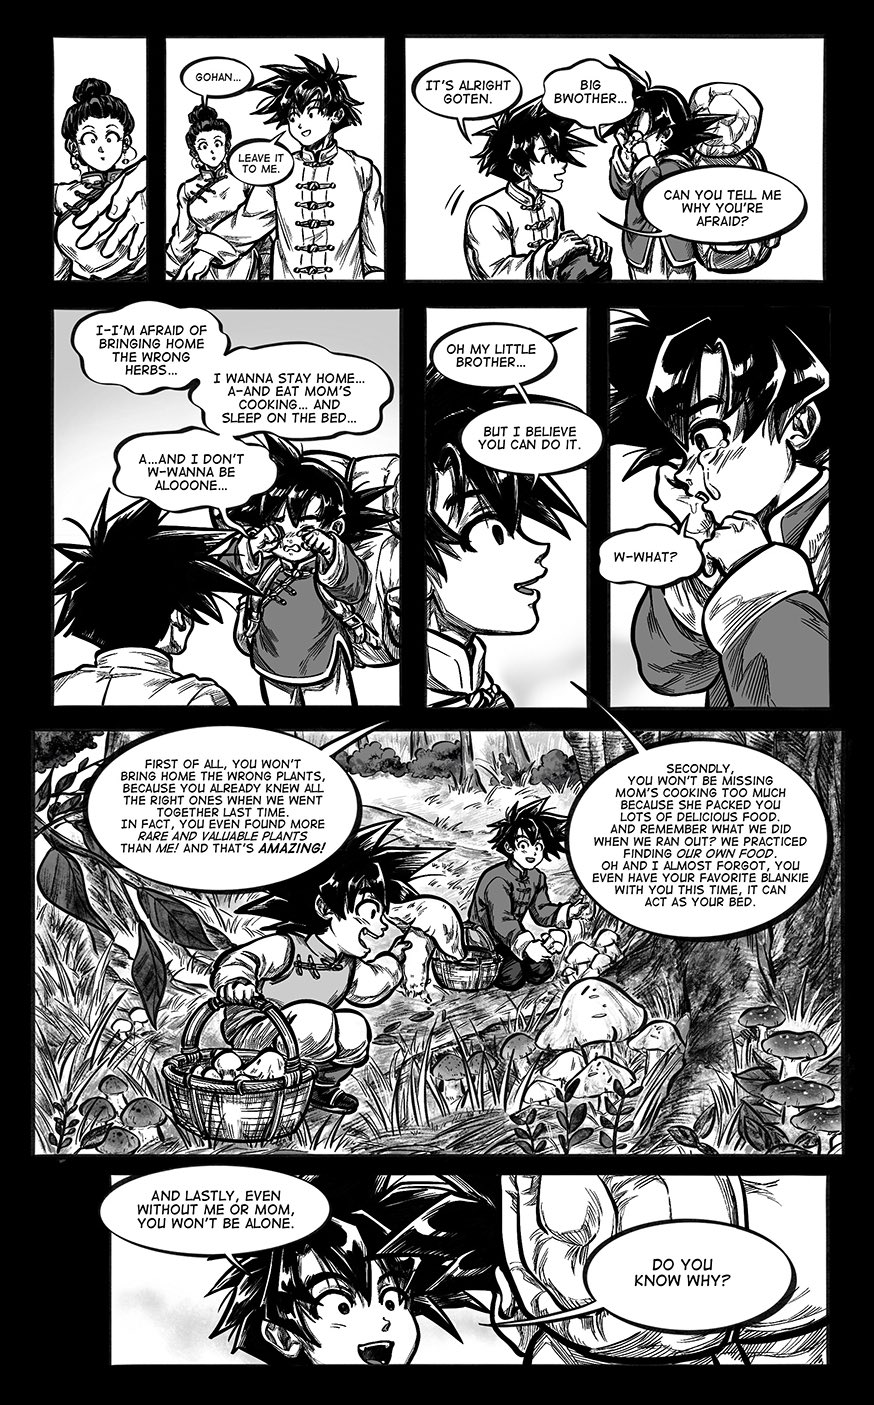 Pan's first fight to the death! - Chapter 6, Page 127 - DBMultiverse